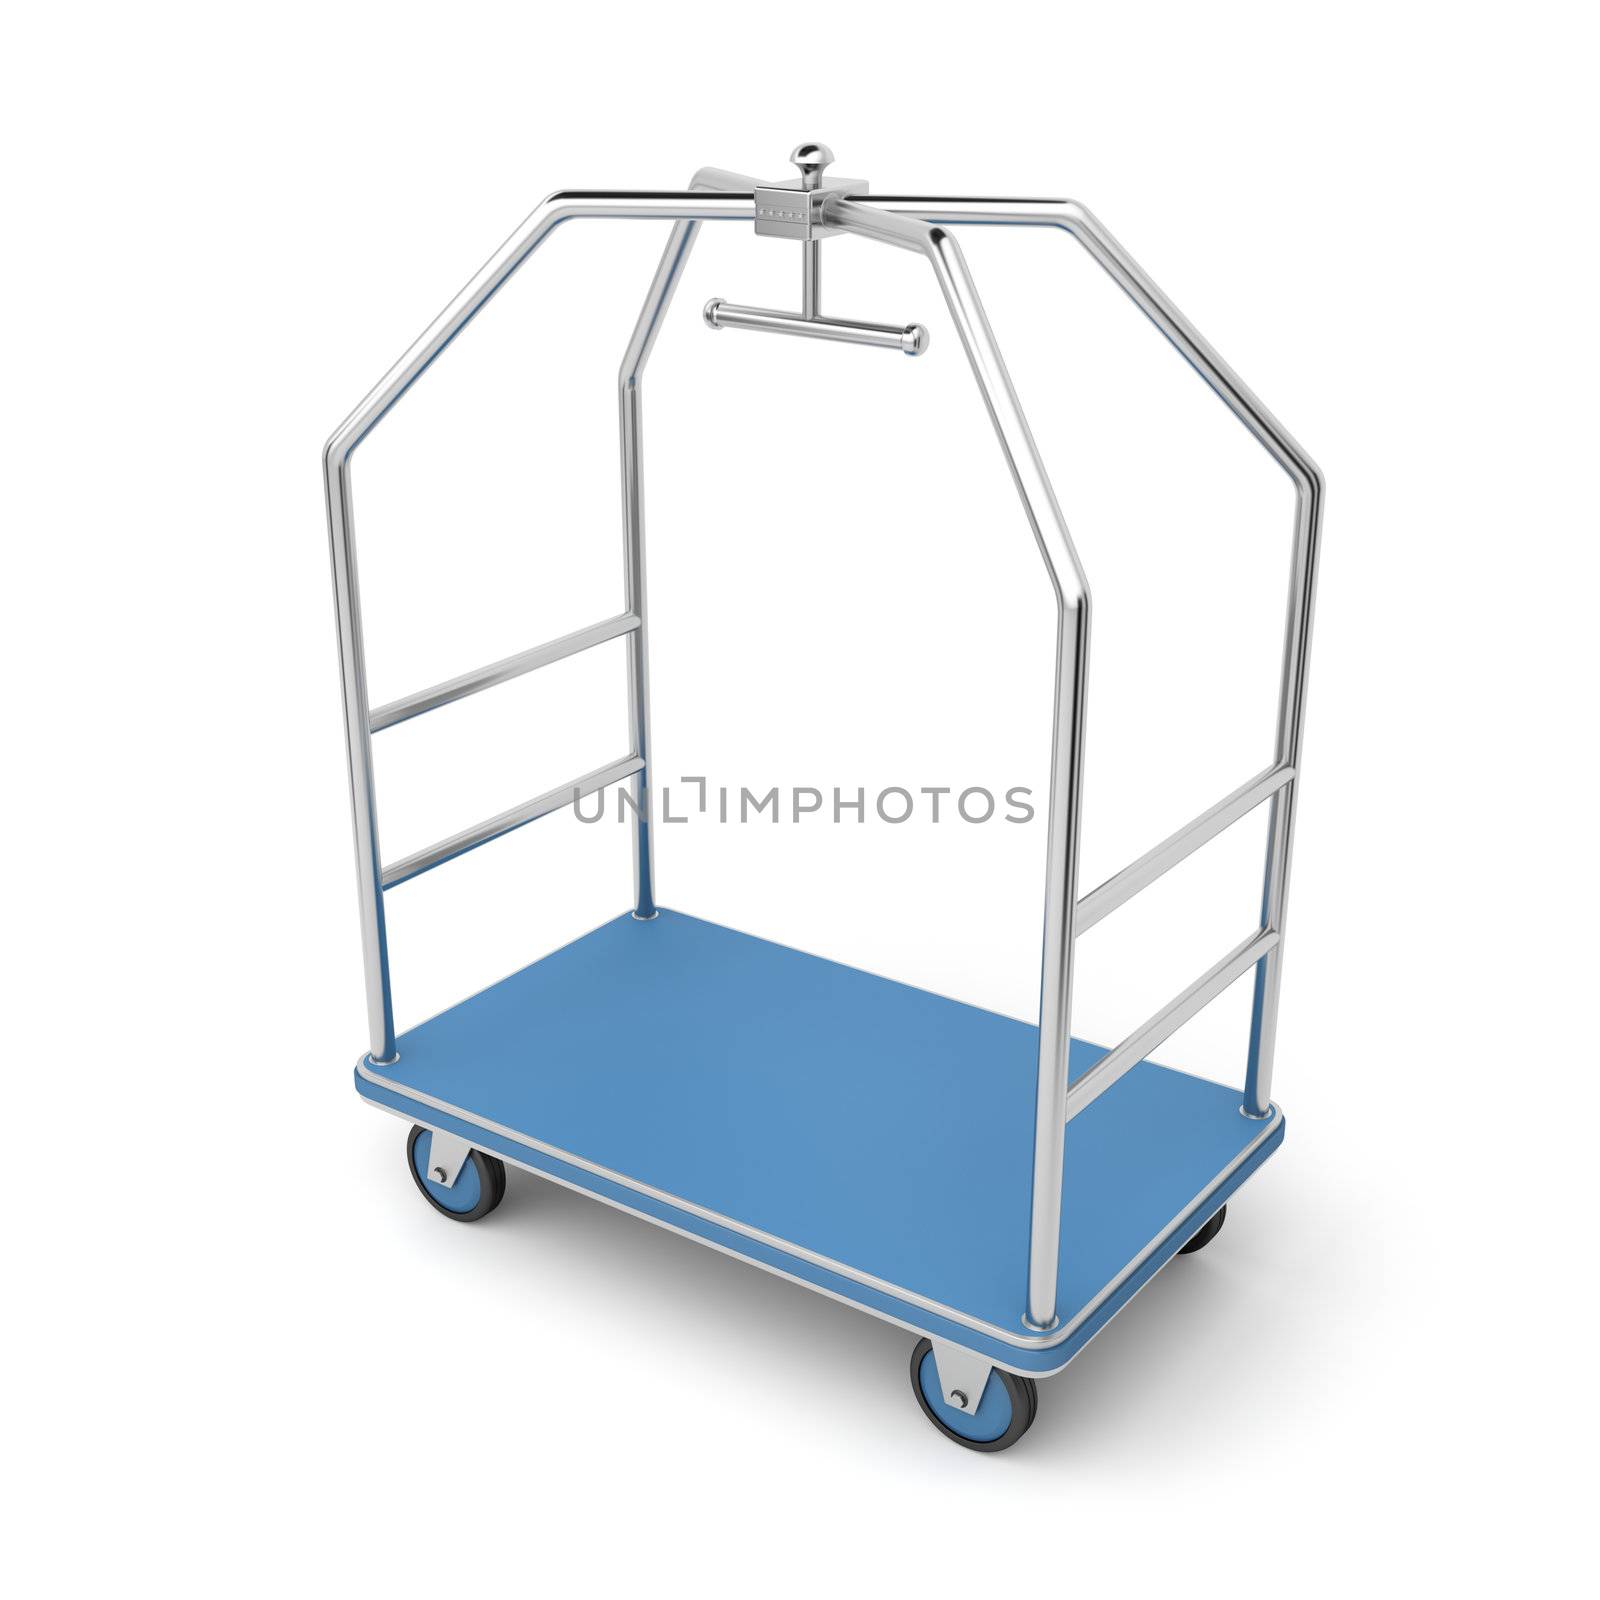 Silver luggage cart on white background